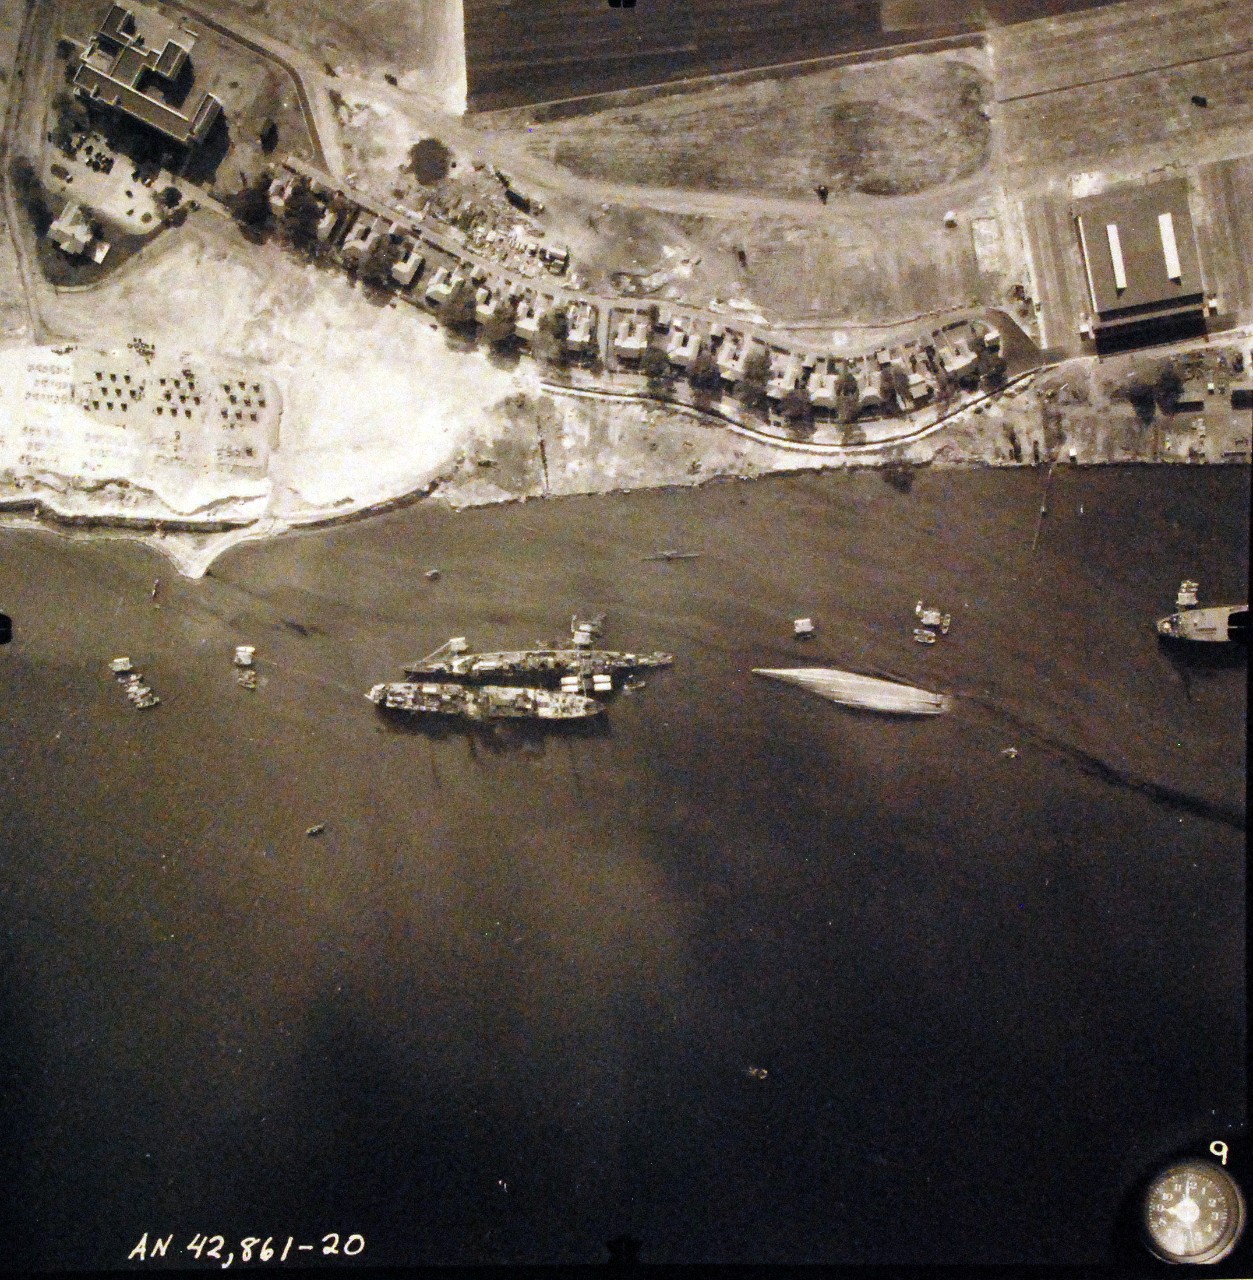 80-G-387581:  Pearl Harbor Attack, 7 December 1941.  Aerial view of "Battleship Row" moorings on the southern side of Ford Island, 10 December 1941, showing damage from the Japanese raid three days earlier.  Shown are USS Raleigh (CL 7), sunk, and USS Utah (BB 31), capsized.  Note dark oil streaks on the harbor surface, originating from the sunken battleships. Photographed by VJ-1 at an altitude of 3,000 feet and released November 9, 1950. U.S. Navy photograph, now in the collections of the National Archives.        (9/22/2015).